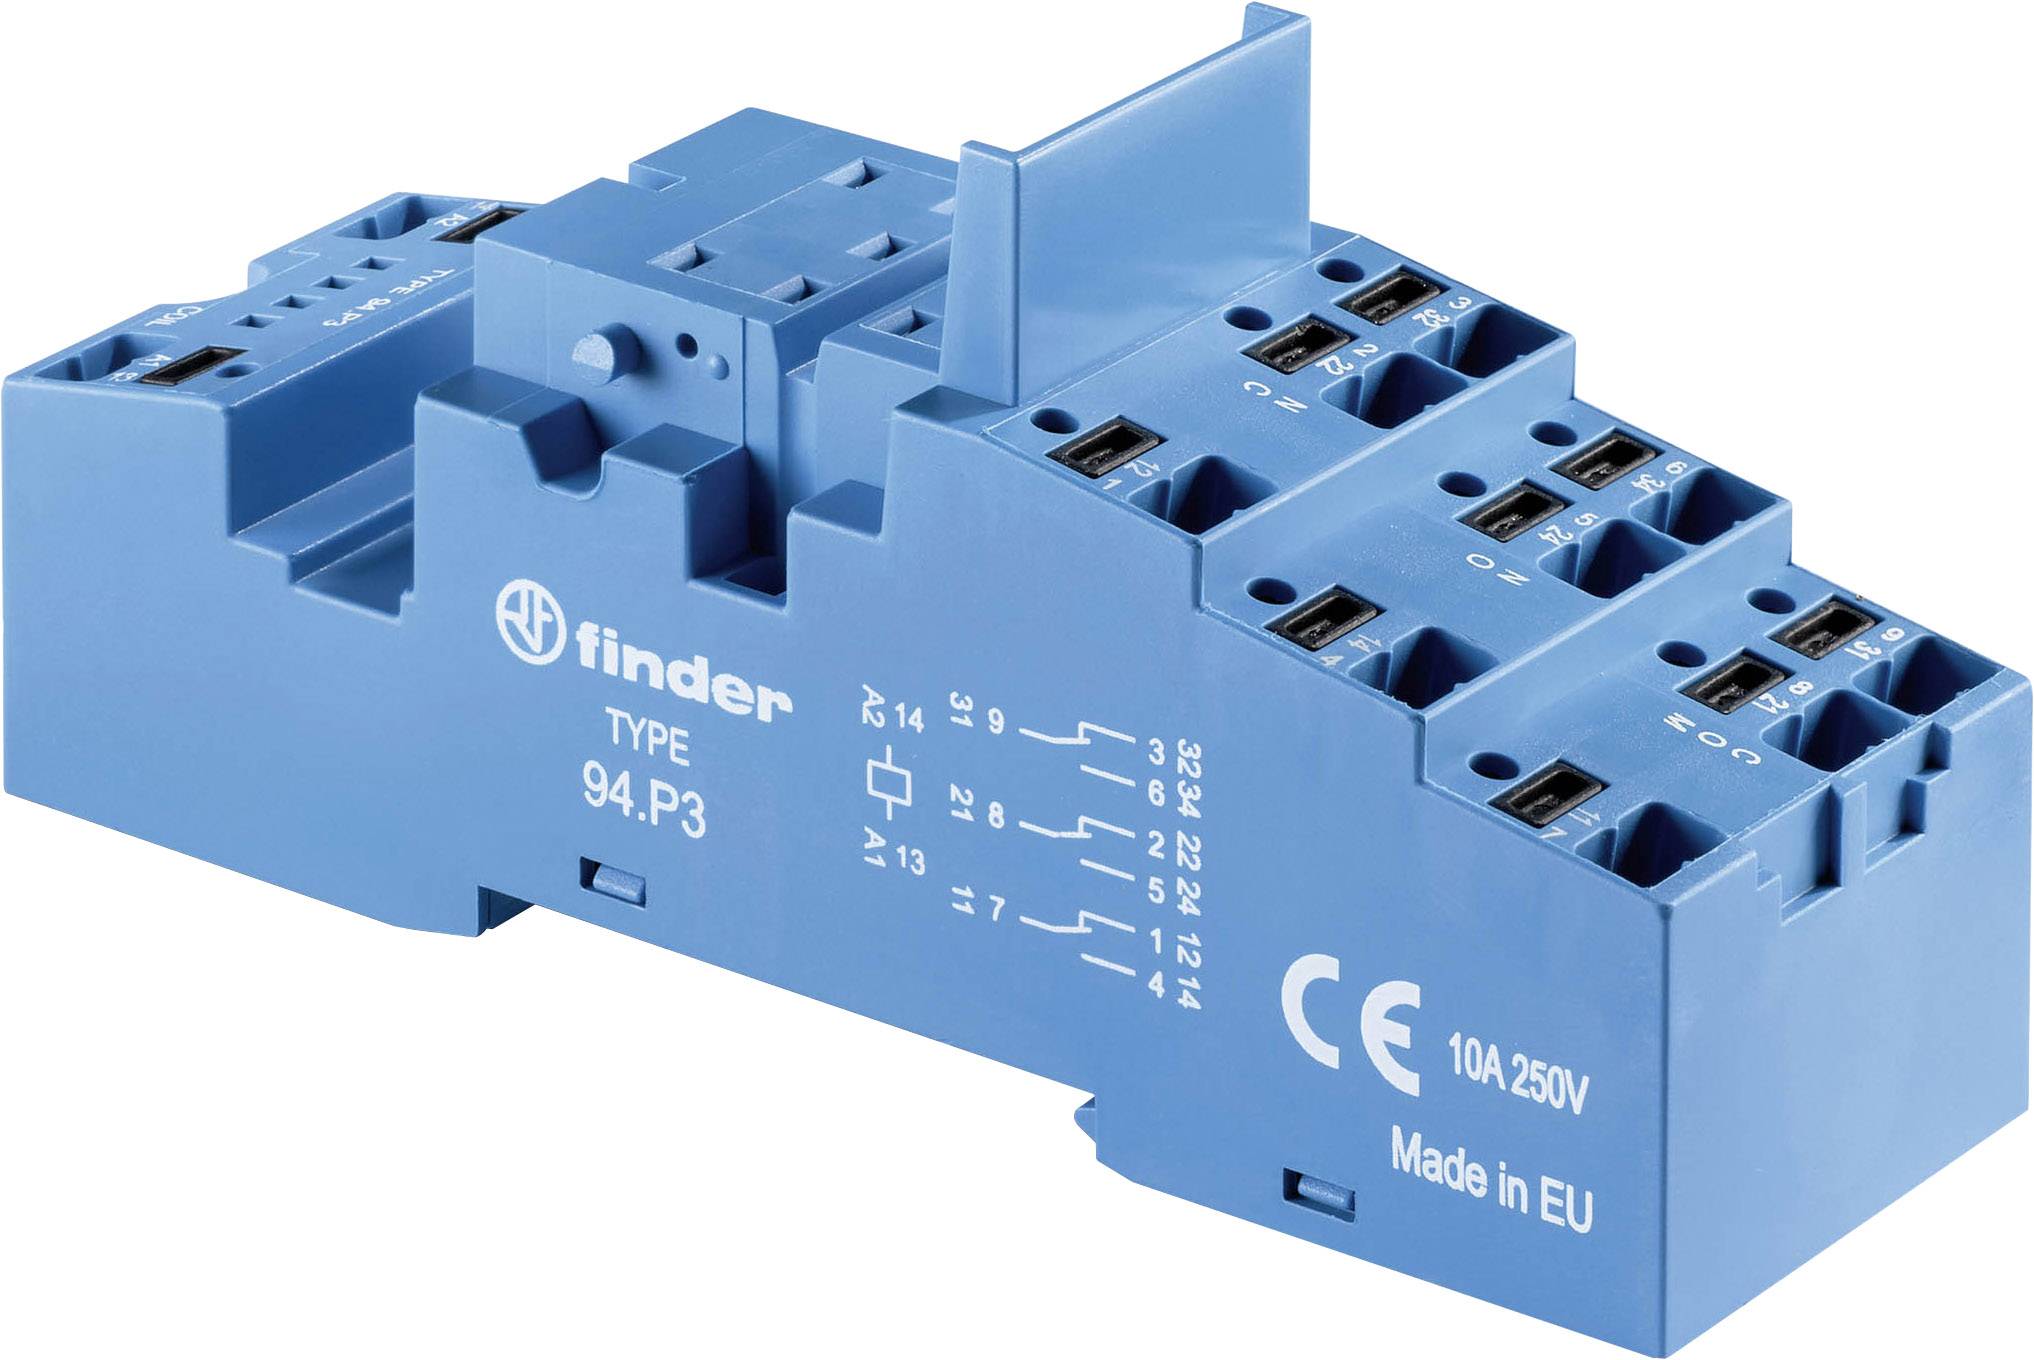 Finder 24.P24 Relay socket Compatible with series: Finder 24 series, Finder  24 series, Finder 024 series Finder 24.242, F